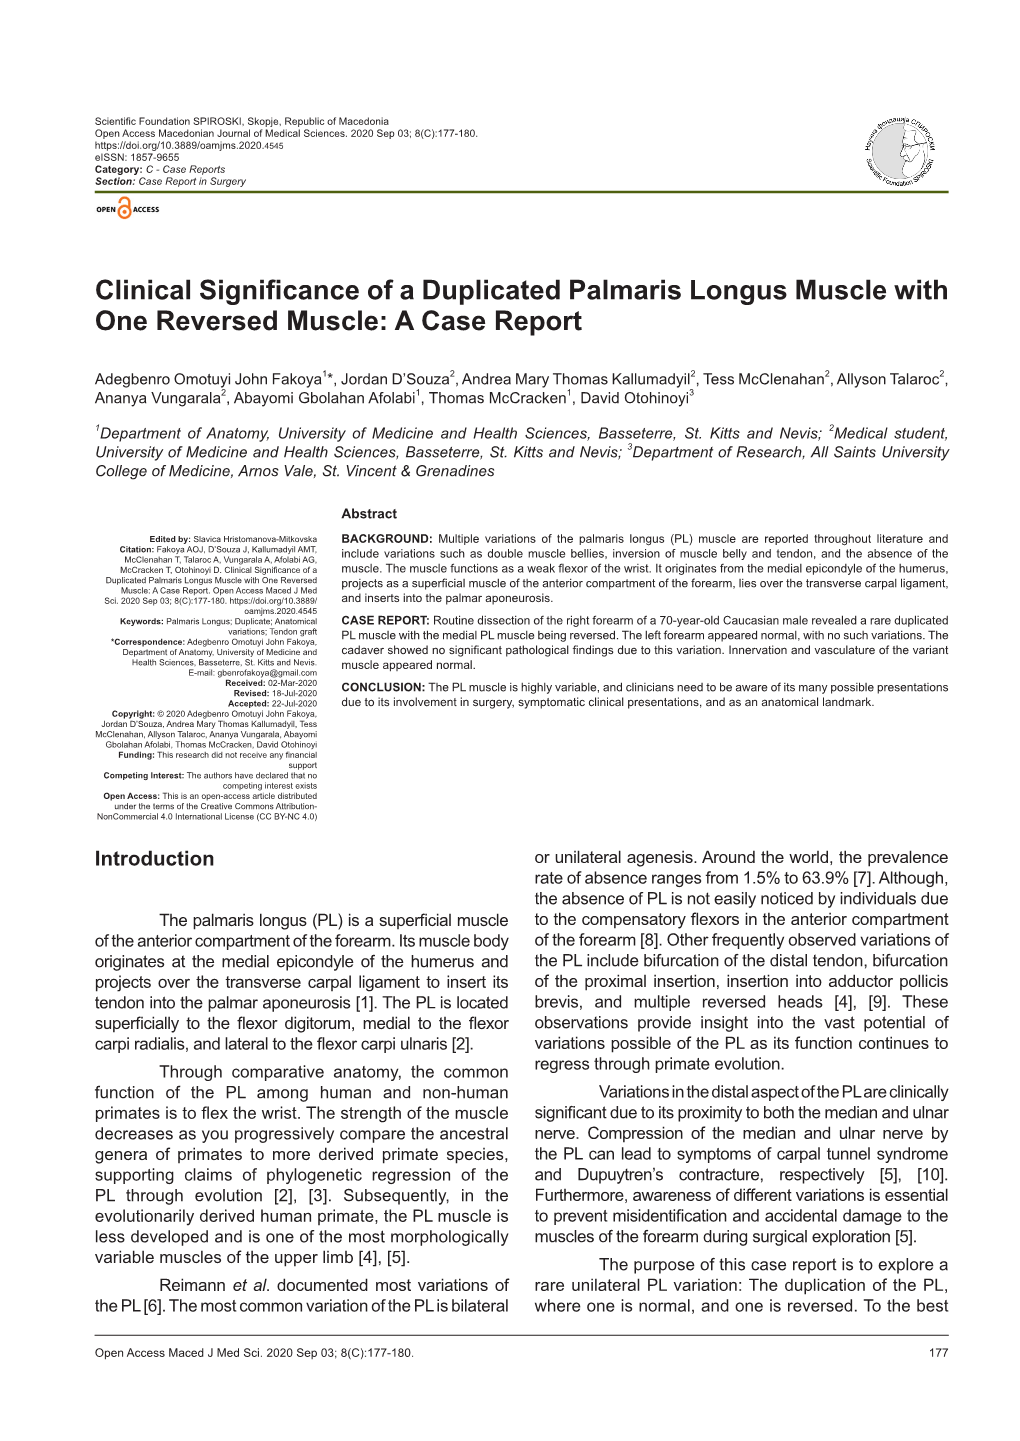 Clinical Significance of a Duplicated Palmaris Longus Muscle with One Reversed Muscle: a Case Report